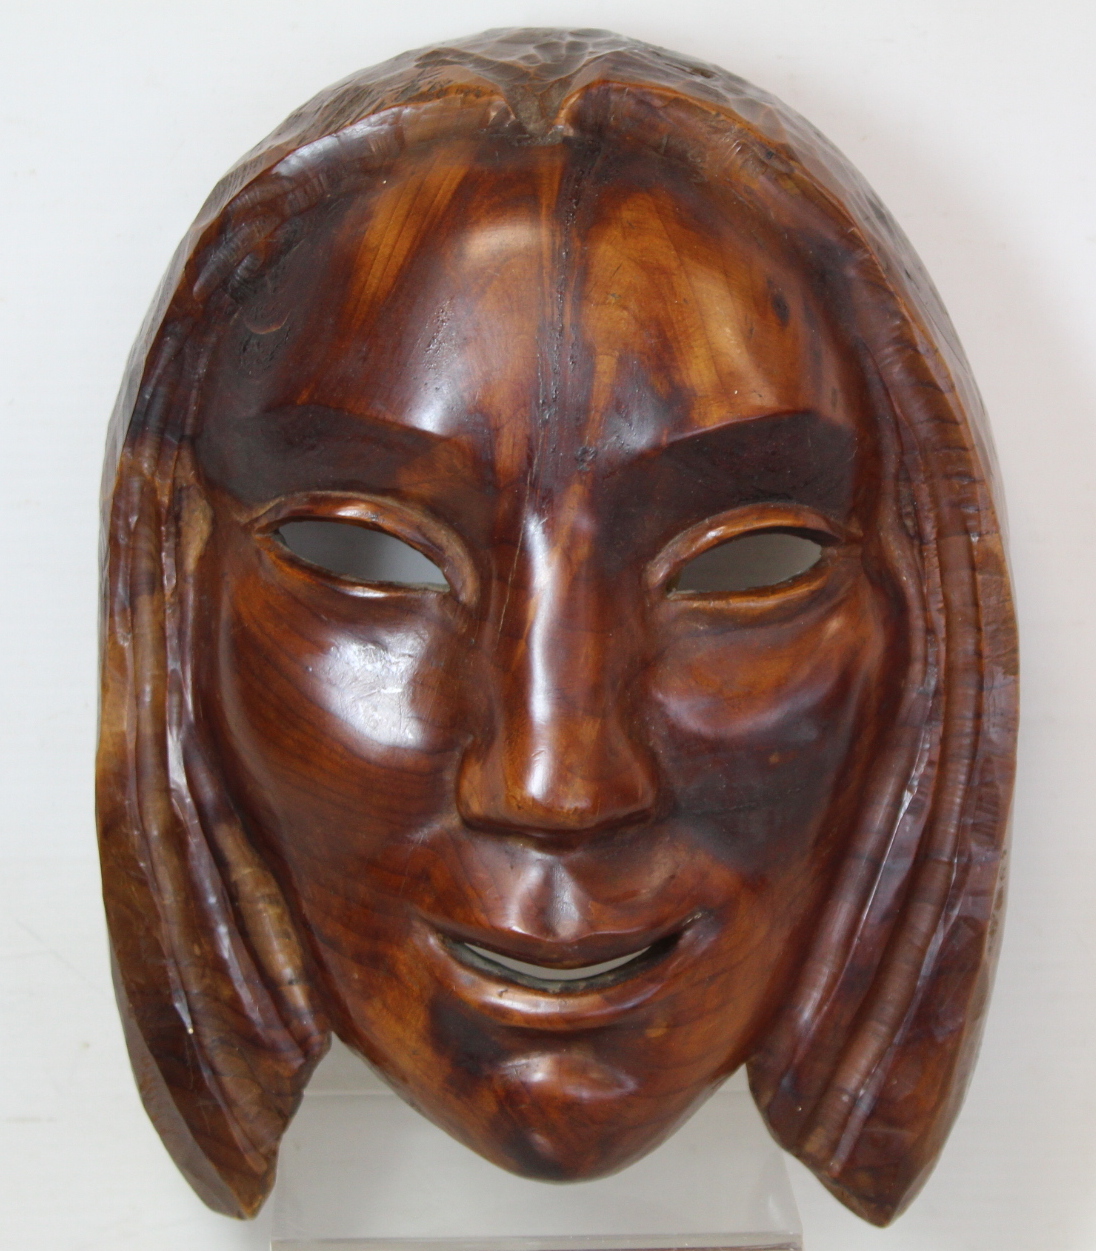 WILLI SOUKOP, R.A. (1907-95).  A carved wooden mask of a girl, signed and dated 1935, 24cm x 18cm.